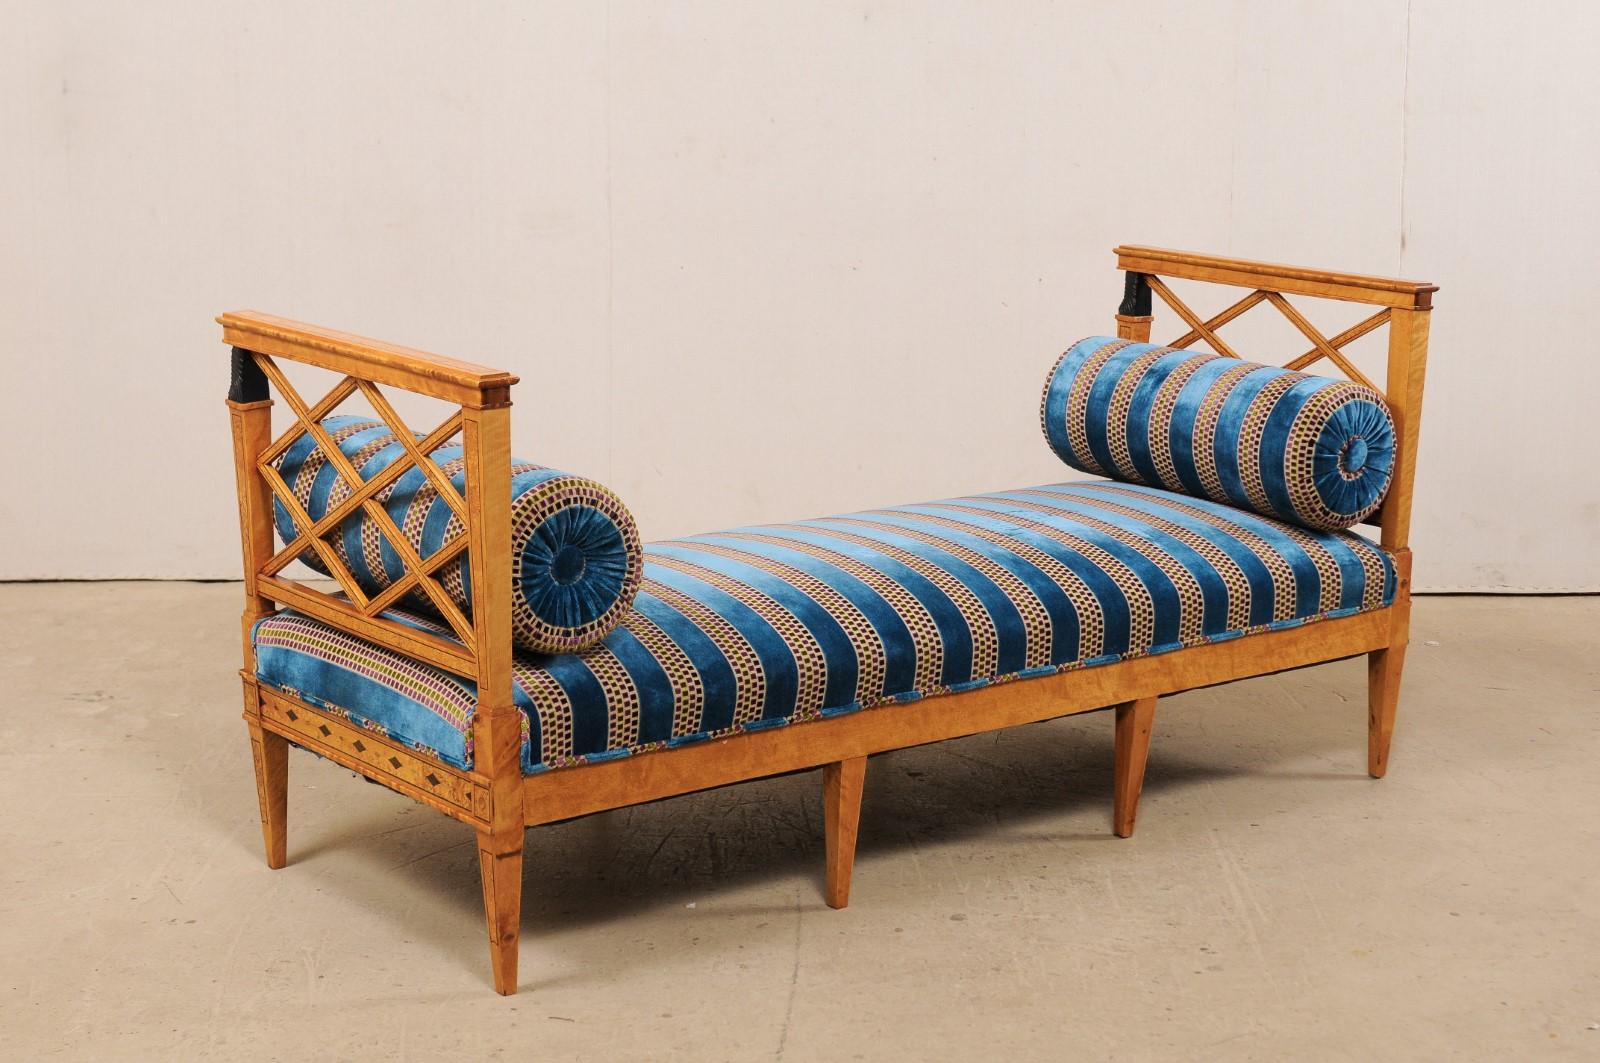 Suédois Swedish Neoclassical Style Upholstered Bench with Egyptian Revival Carvings